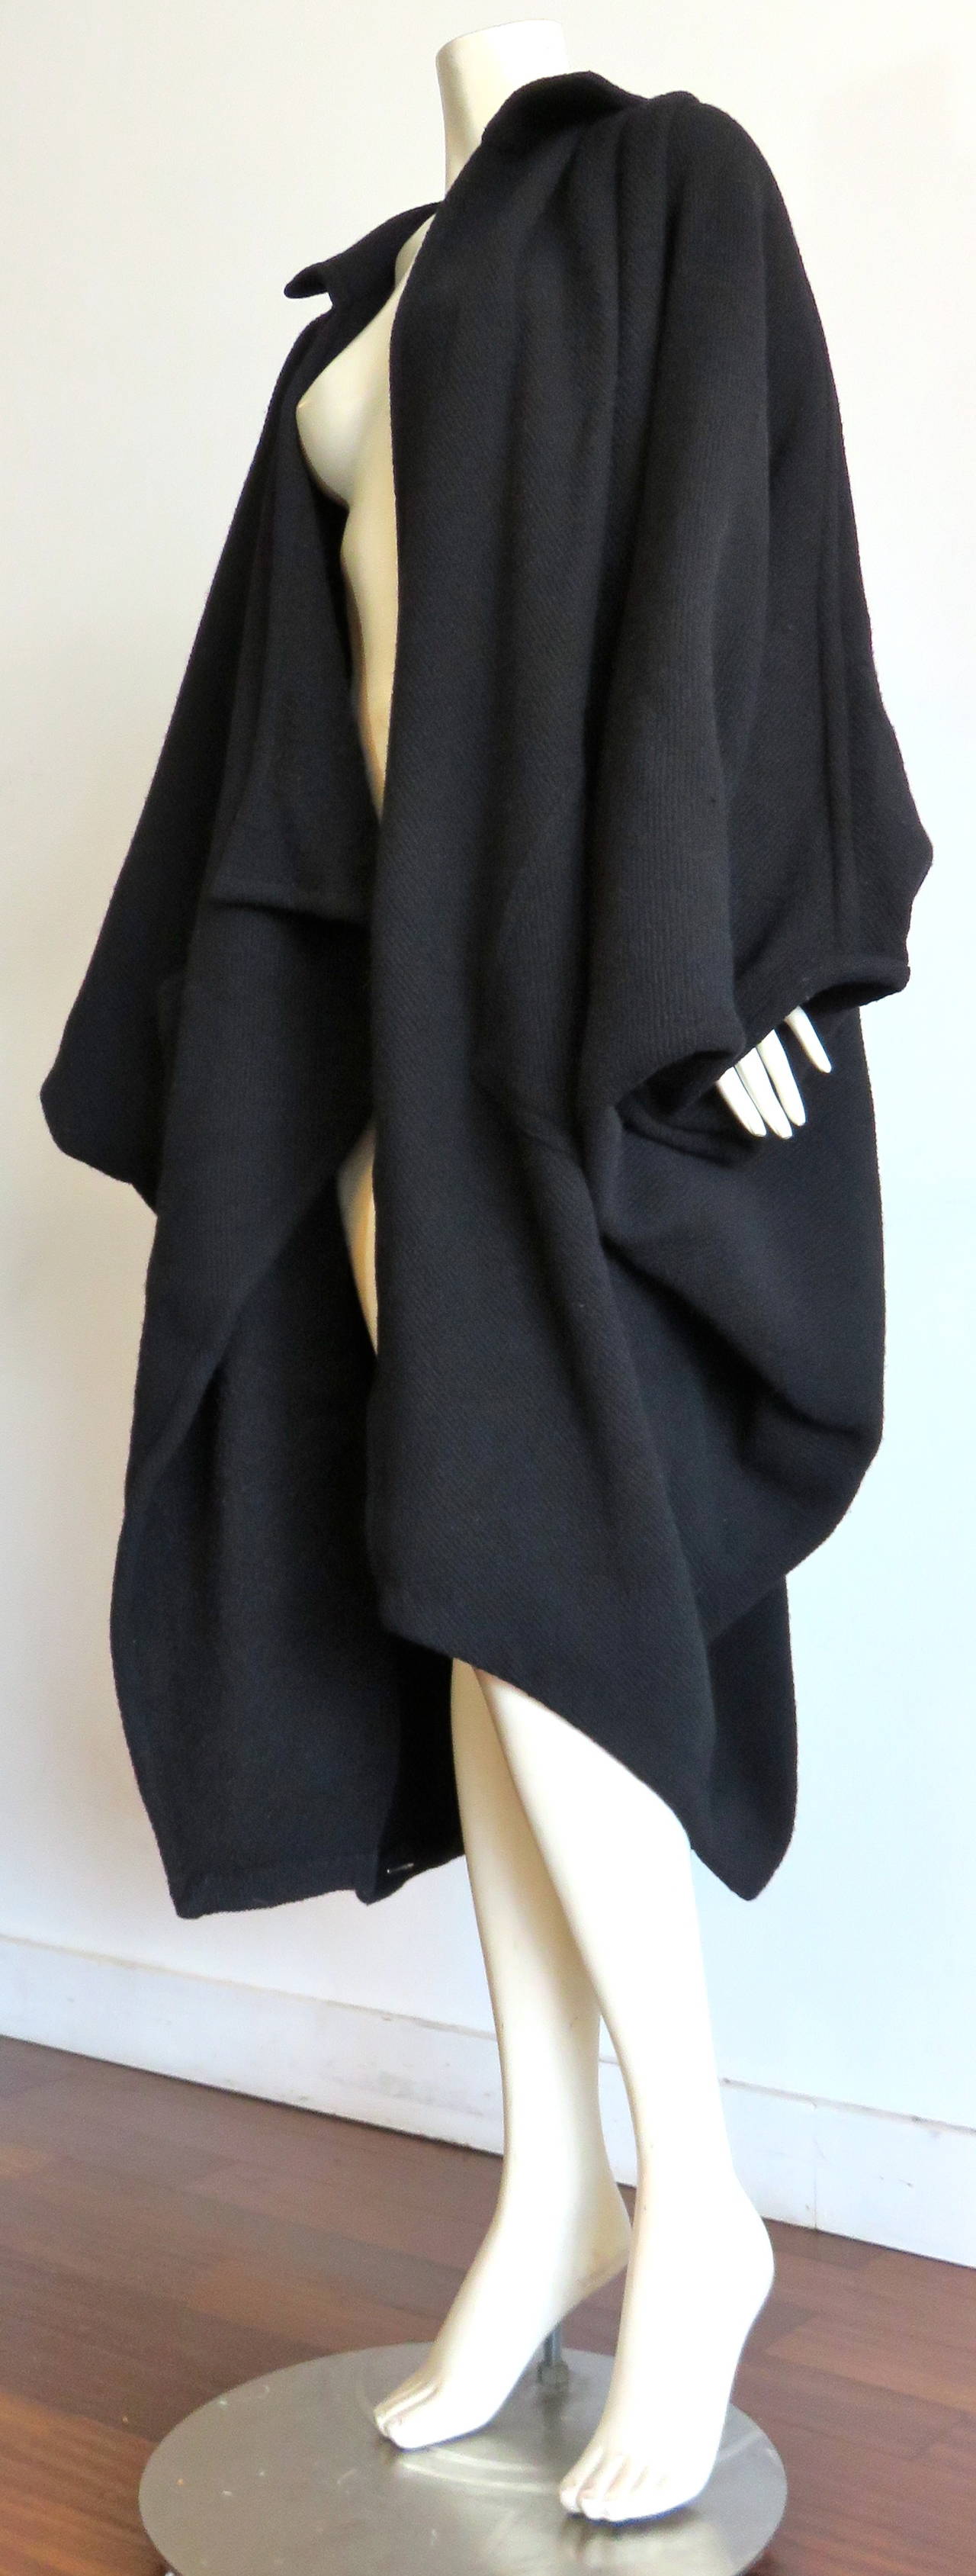 1976 ISSEY MIYAKE Oversized batwing cocoon coat For Sale 3